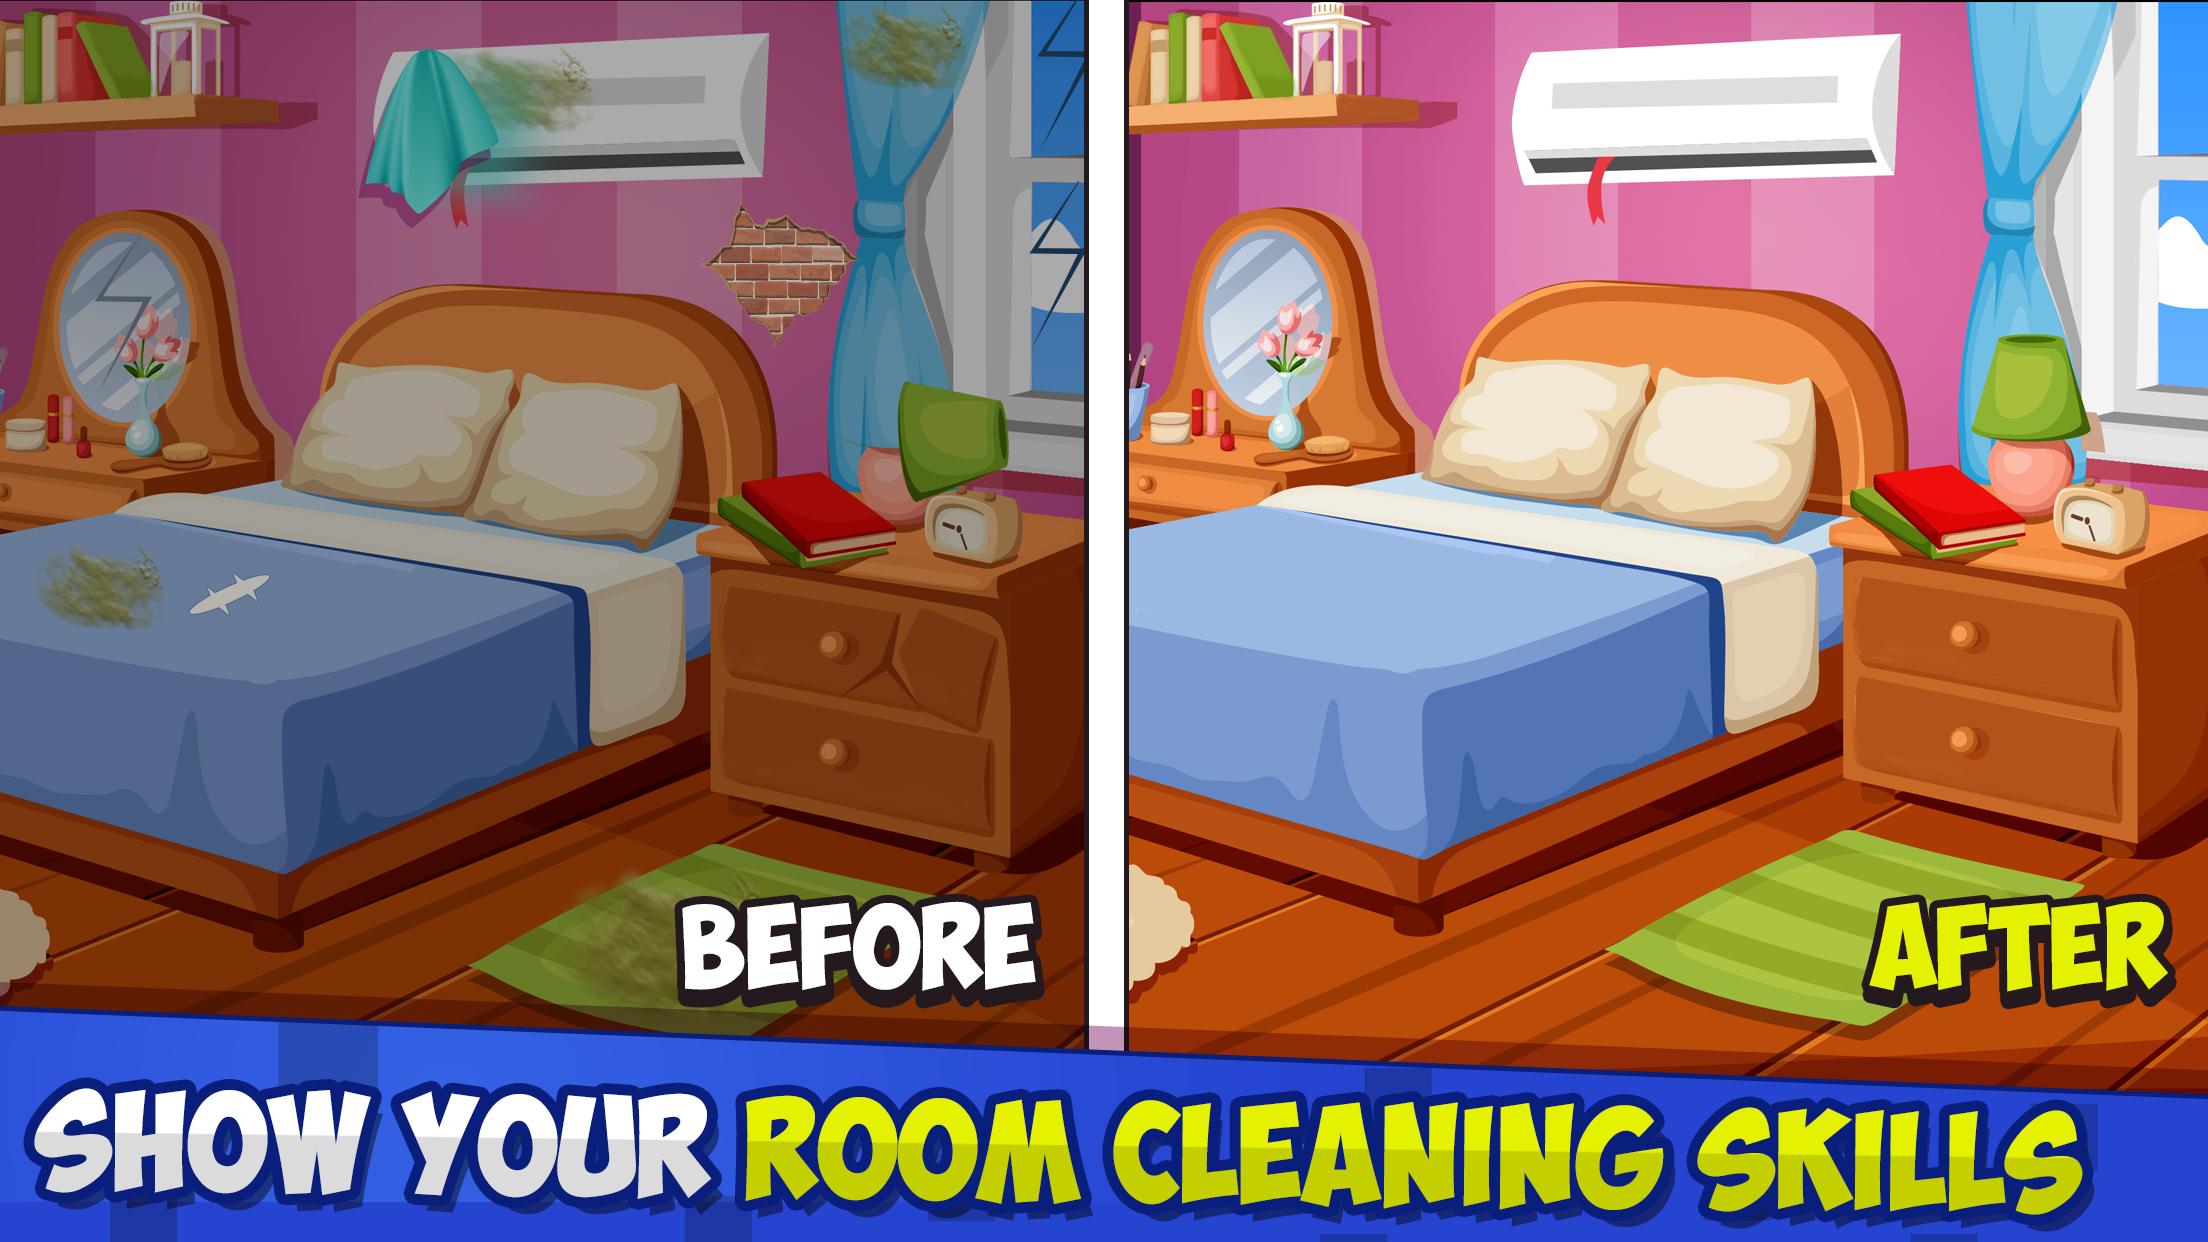 Clean up room. Animal Hotel Manager. Clean the Room spot the difference. Spot differences Hotel.